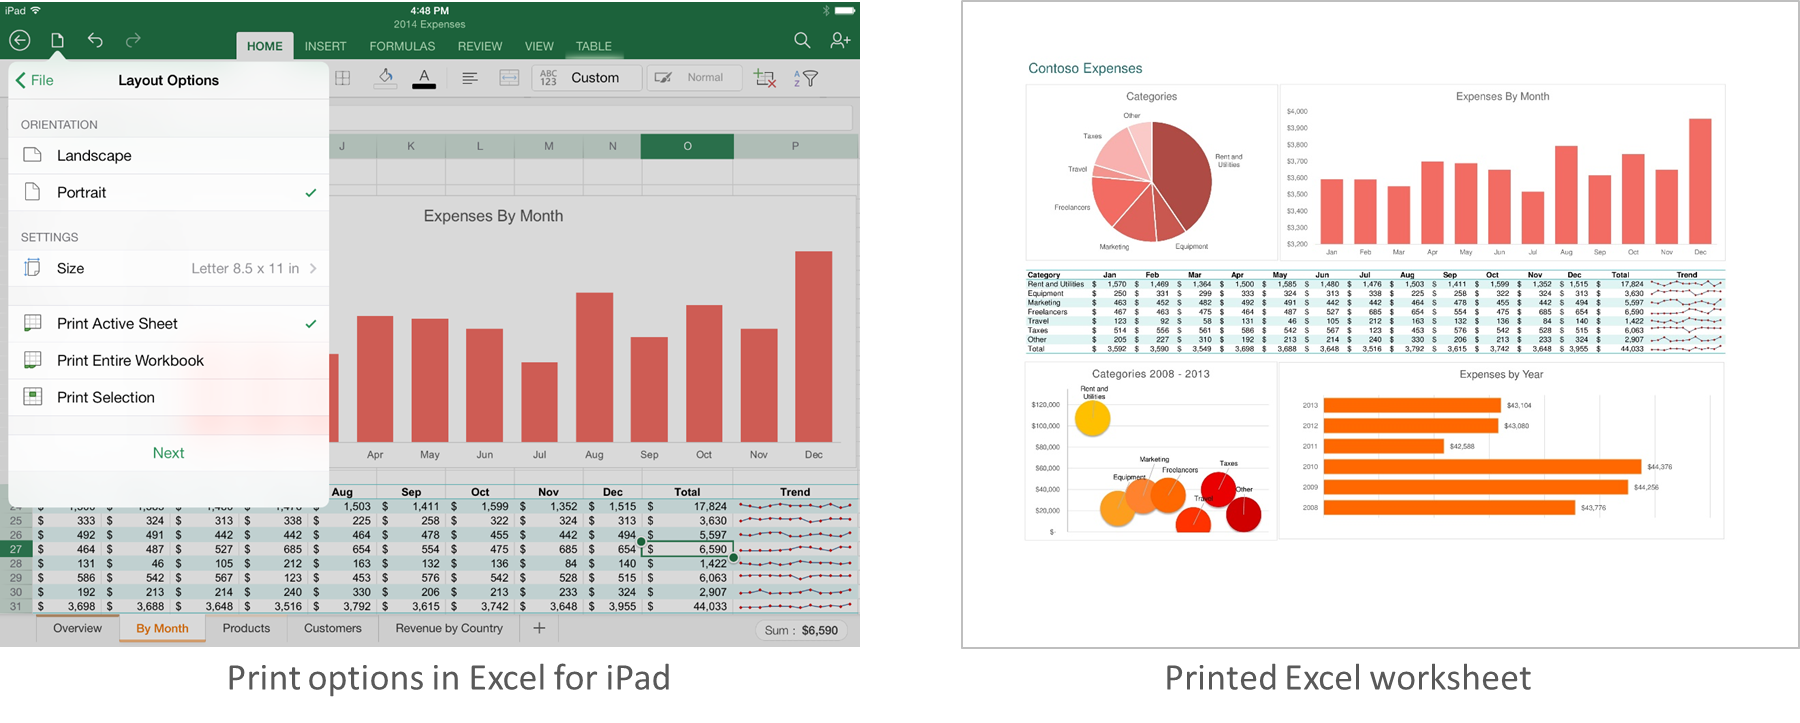 Print options in Excel for iPad and printed Excel worksheet